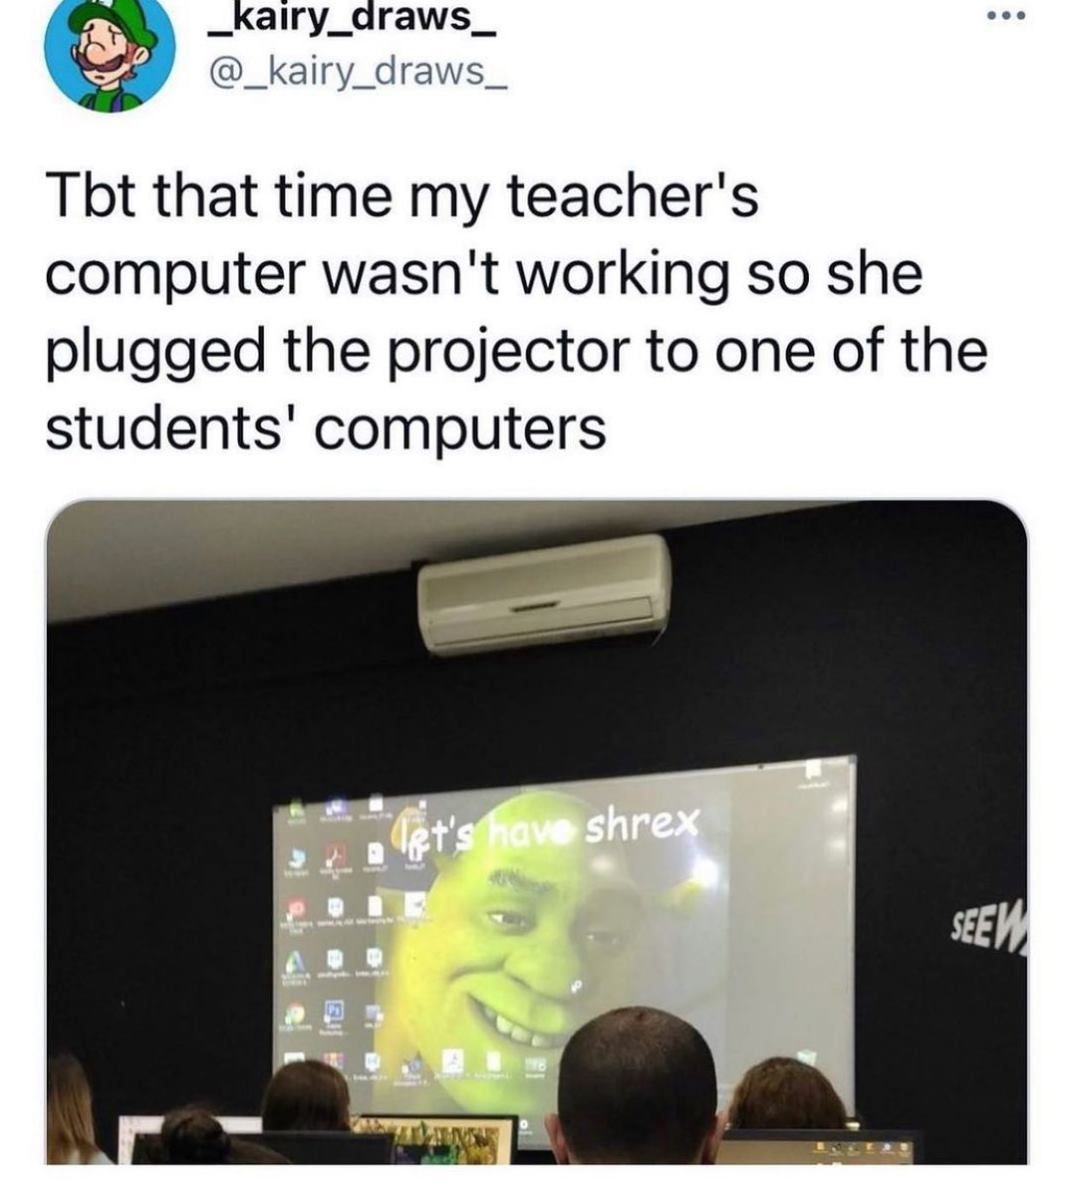 let's have shrex meme - ... _kairy_draws_ Tbt that time my teacher's computer wasn't working so she plugged the projector to one of the students' computers let's have shrex Seew